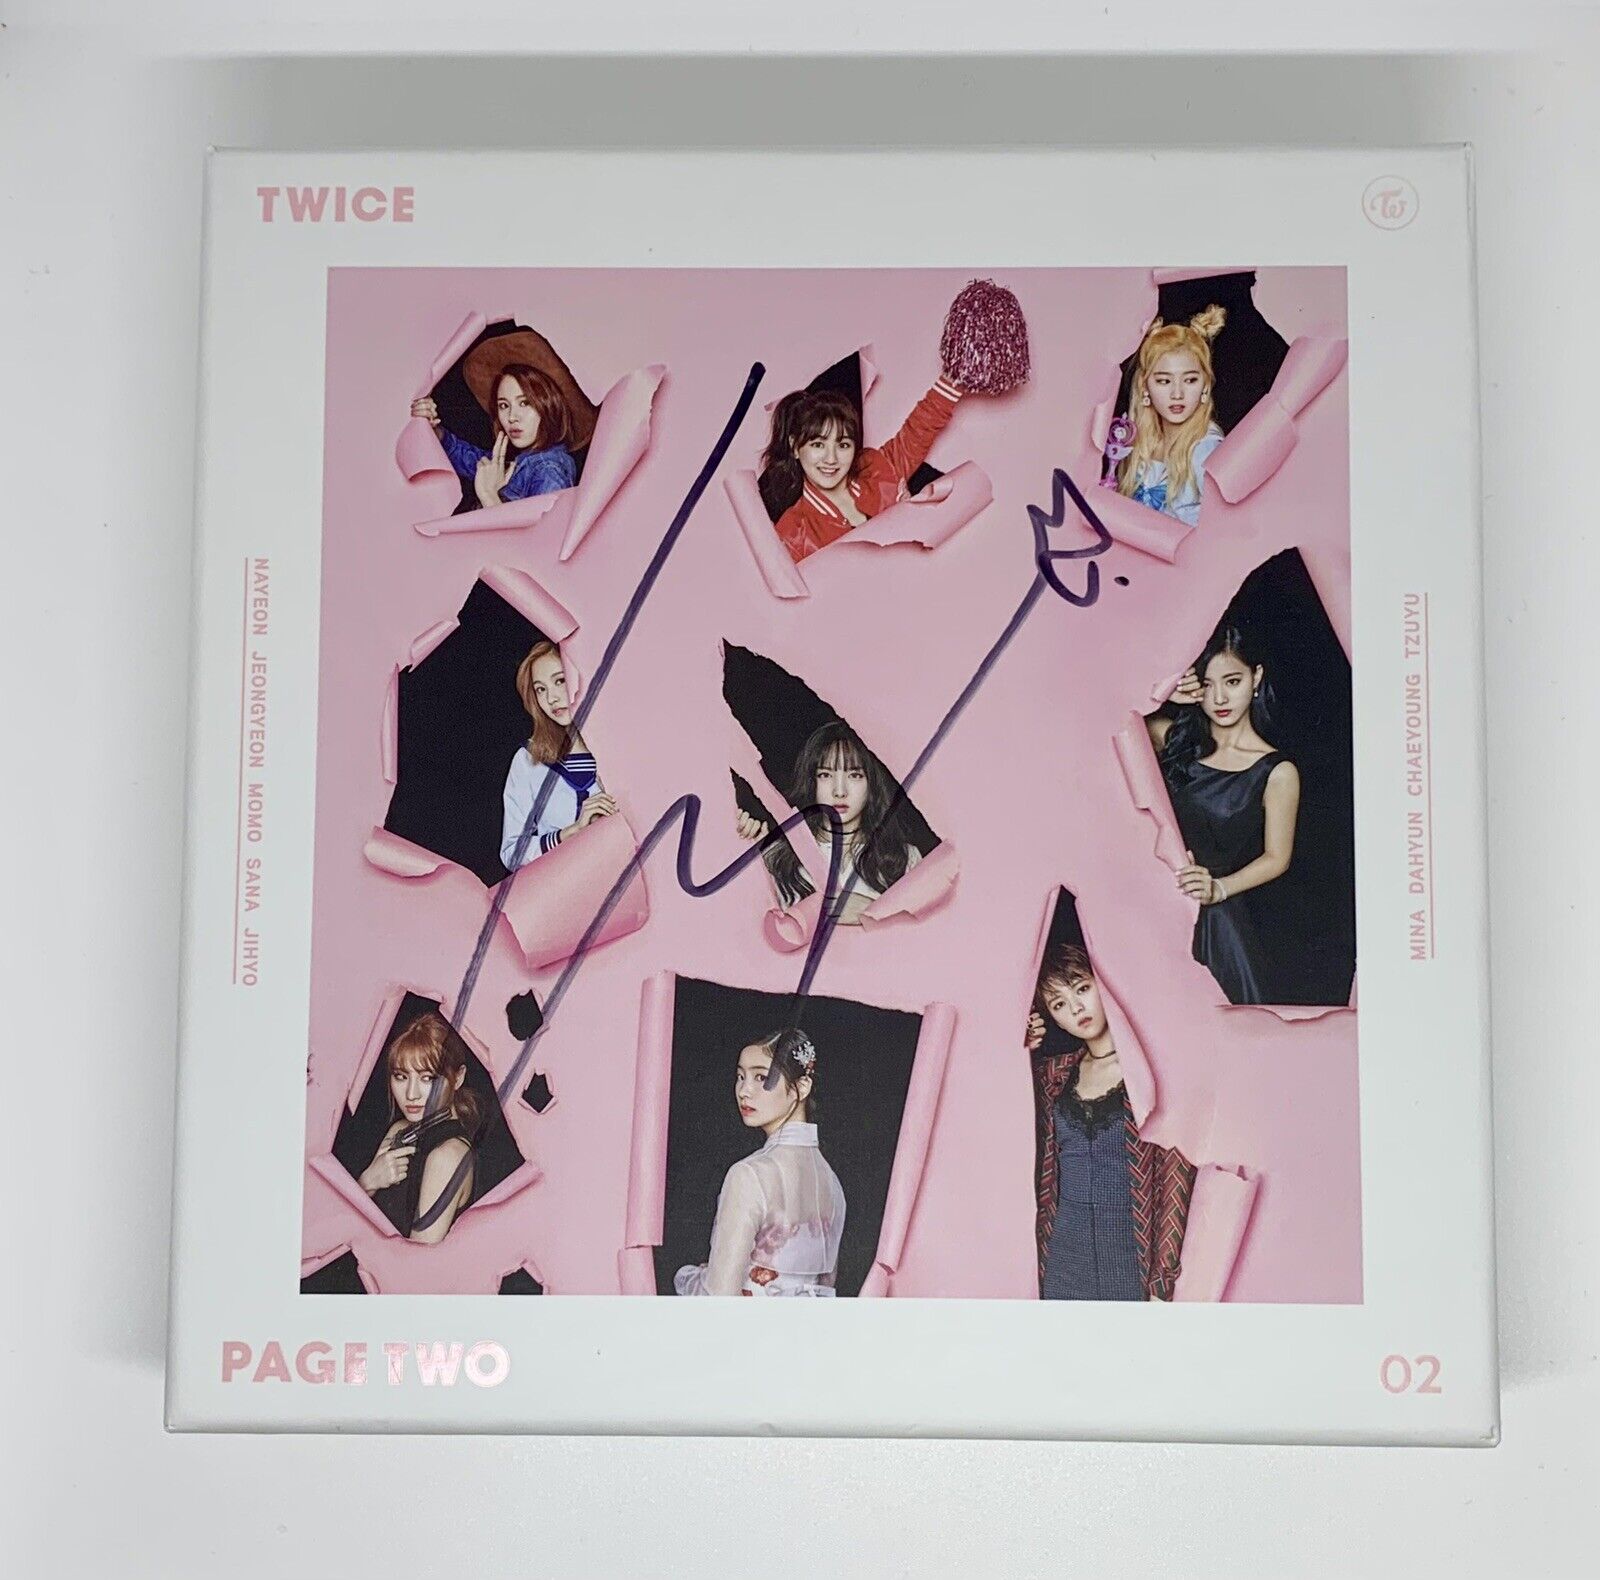 Signed Twice Chaeyoung Page Two Album Autographed